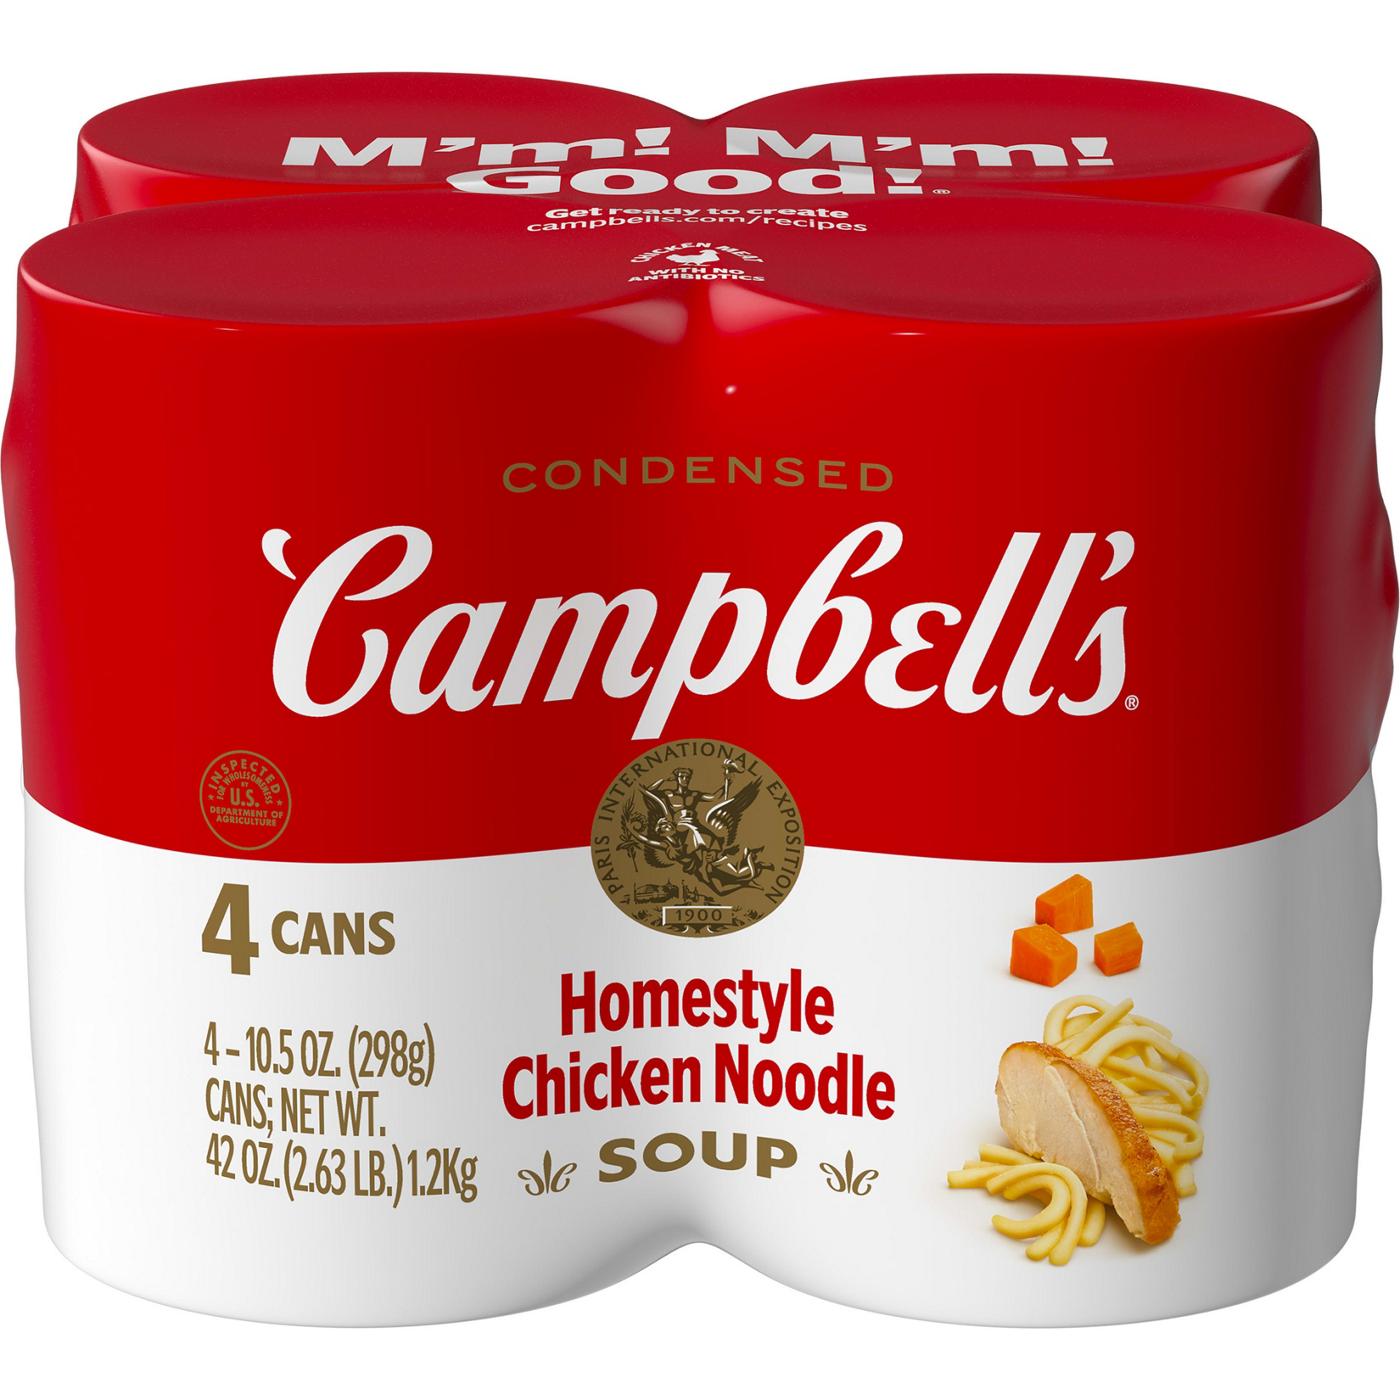 Campbell's Homestyle Chicken Noodle Soup; image 1 of 2